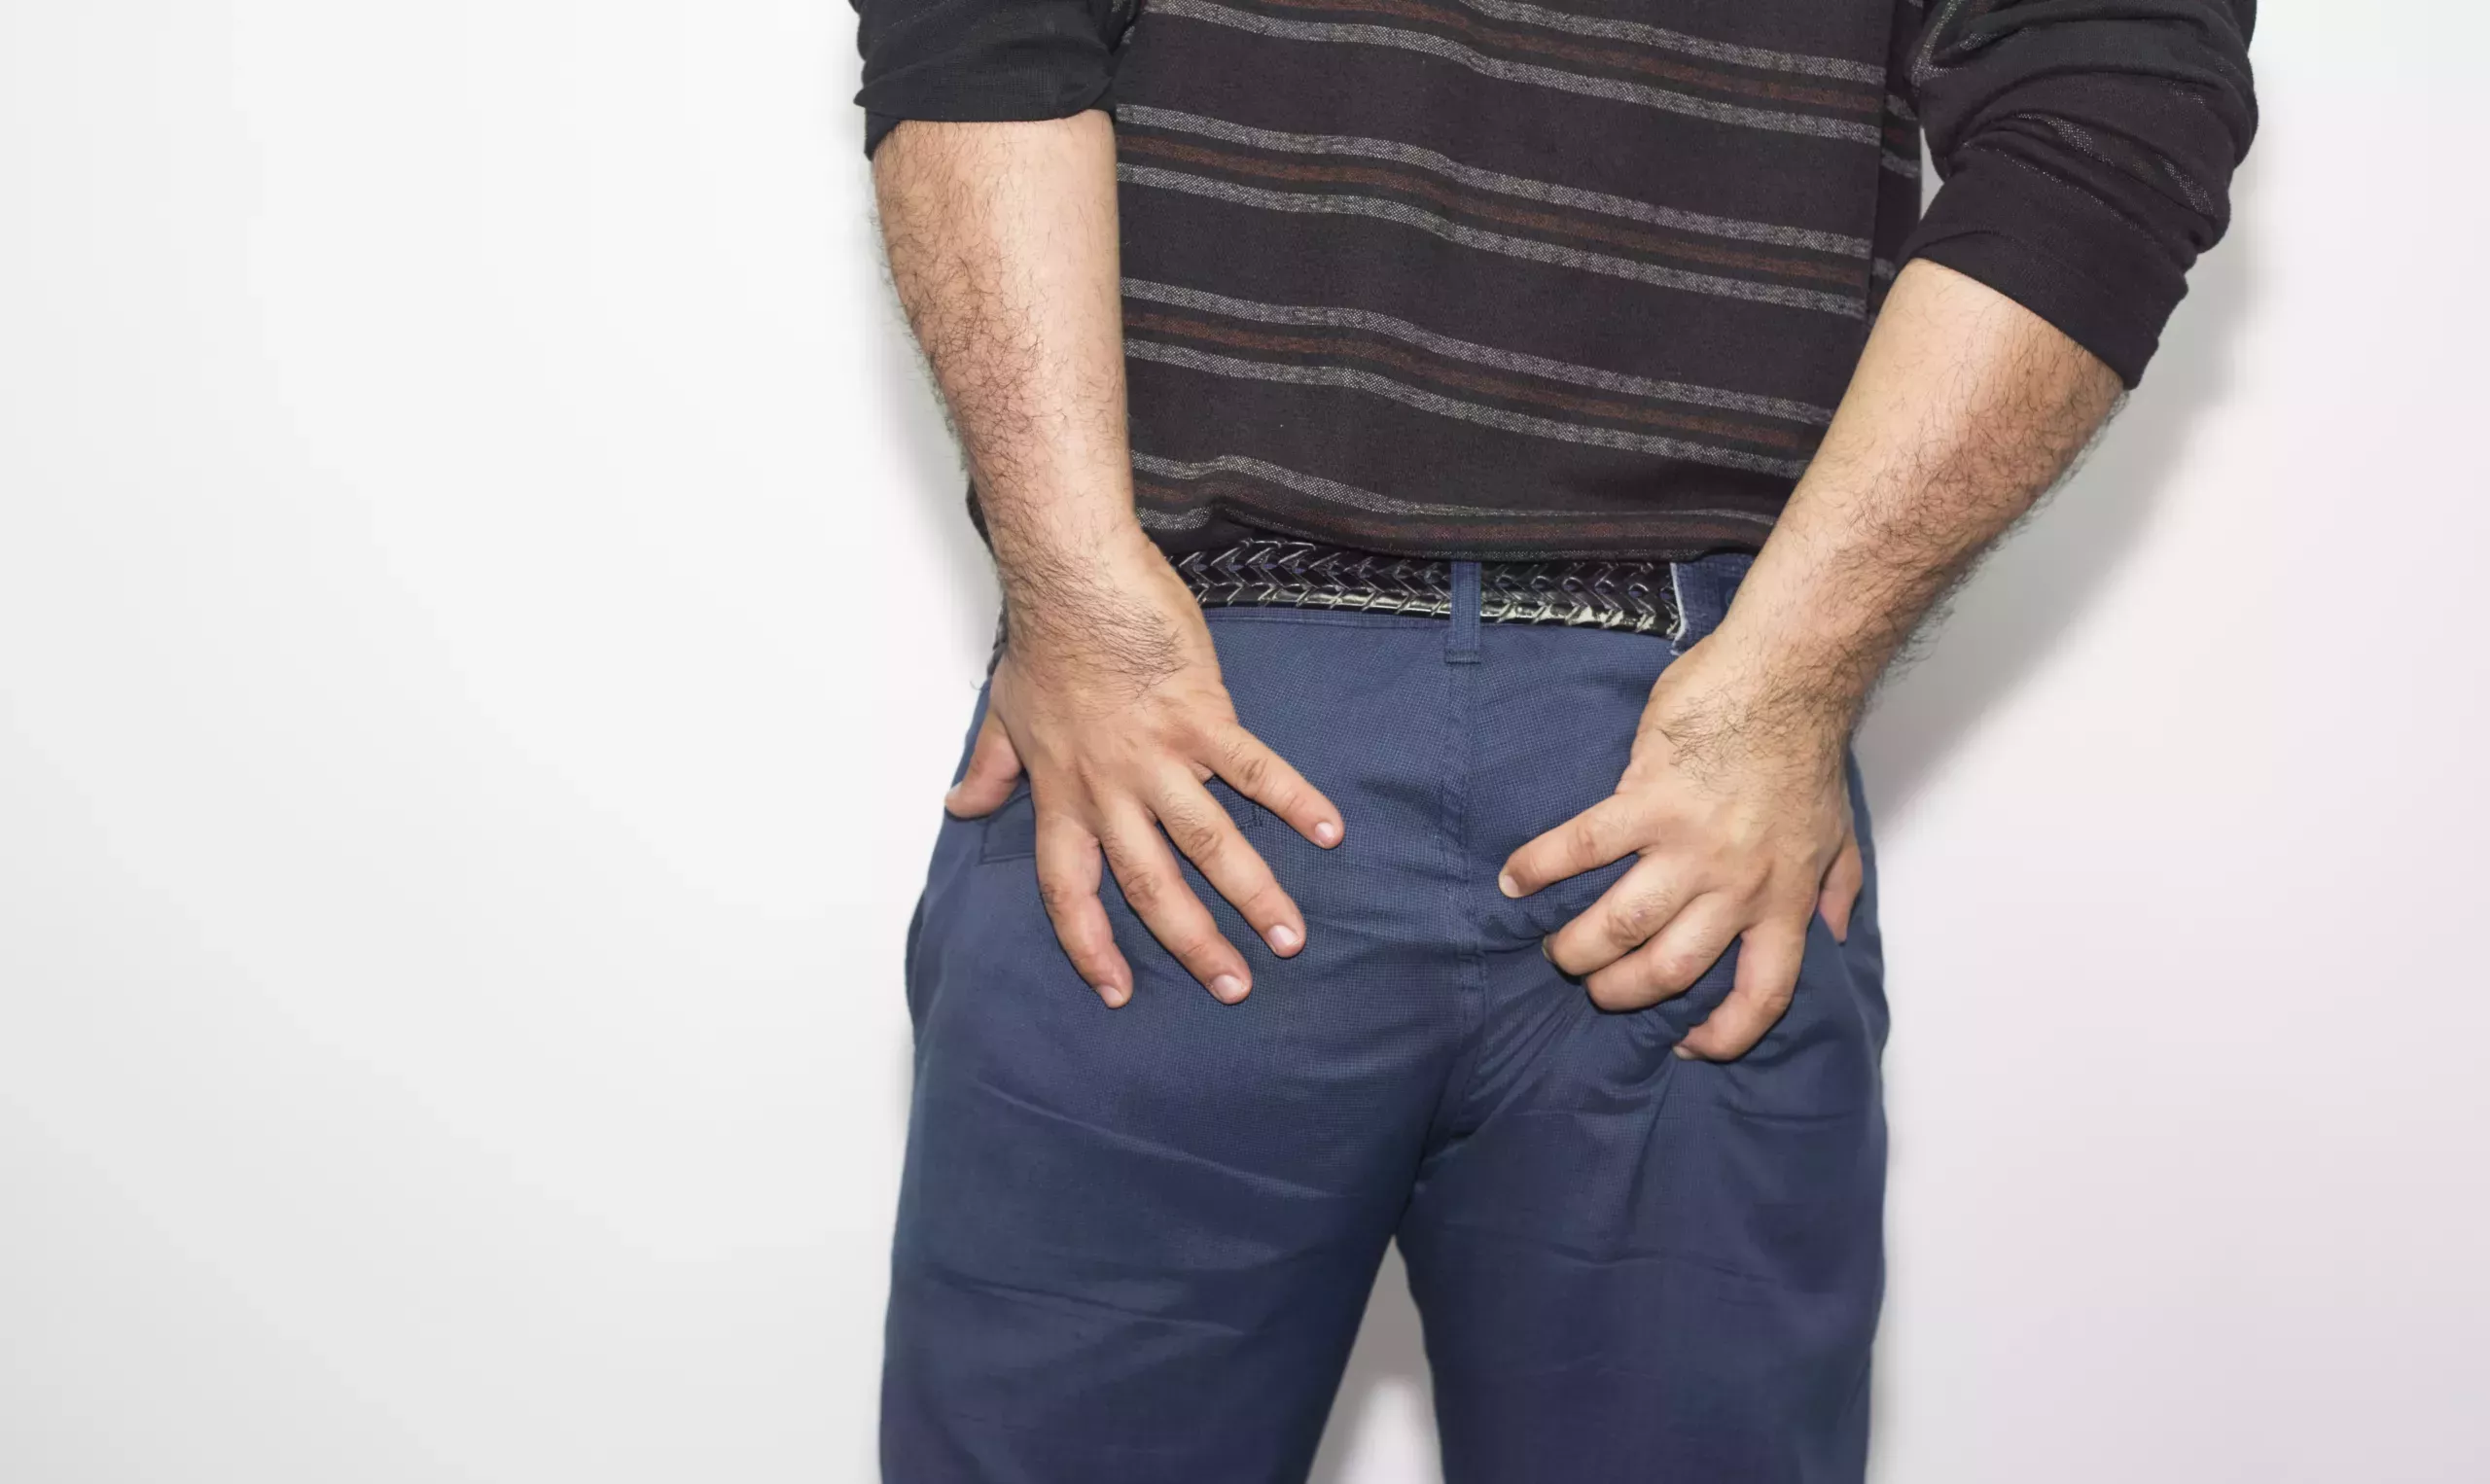 Man in blue pants grabbing his butt checks and squeezing.